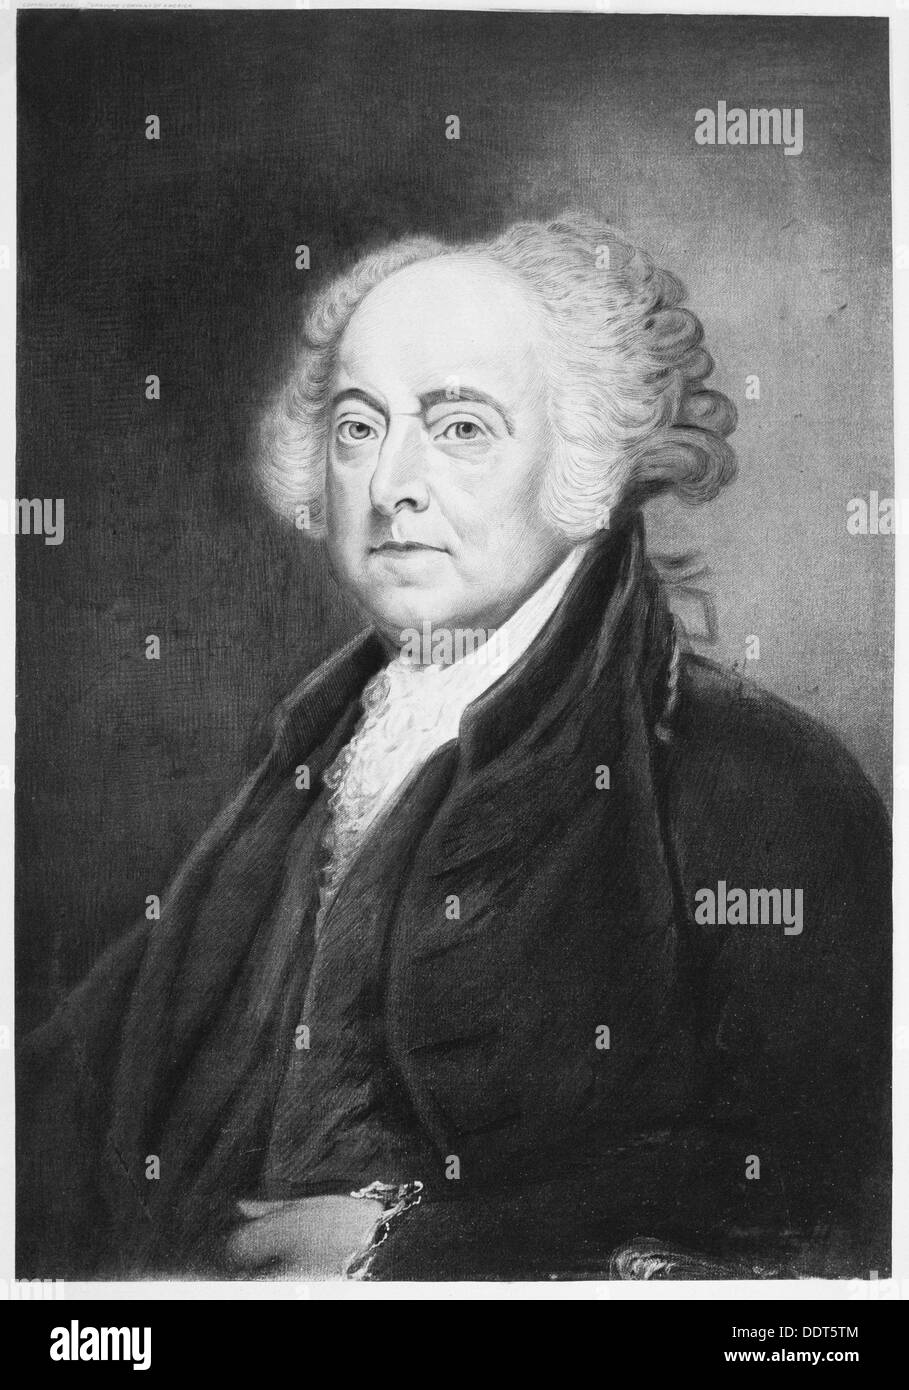 John Adams, 2nd President of the United States of America Artist: Unknown Stock Photo